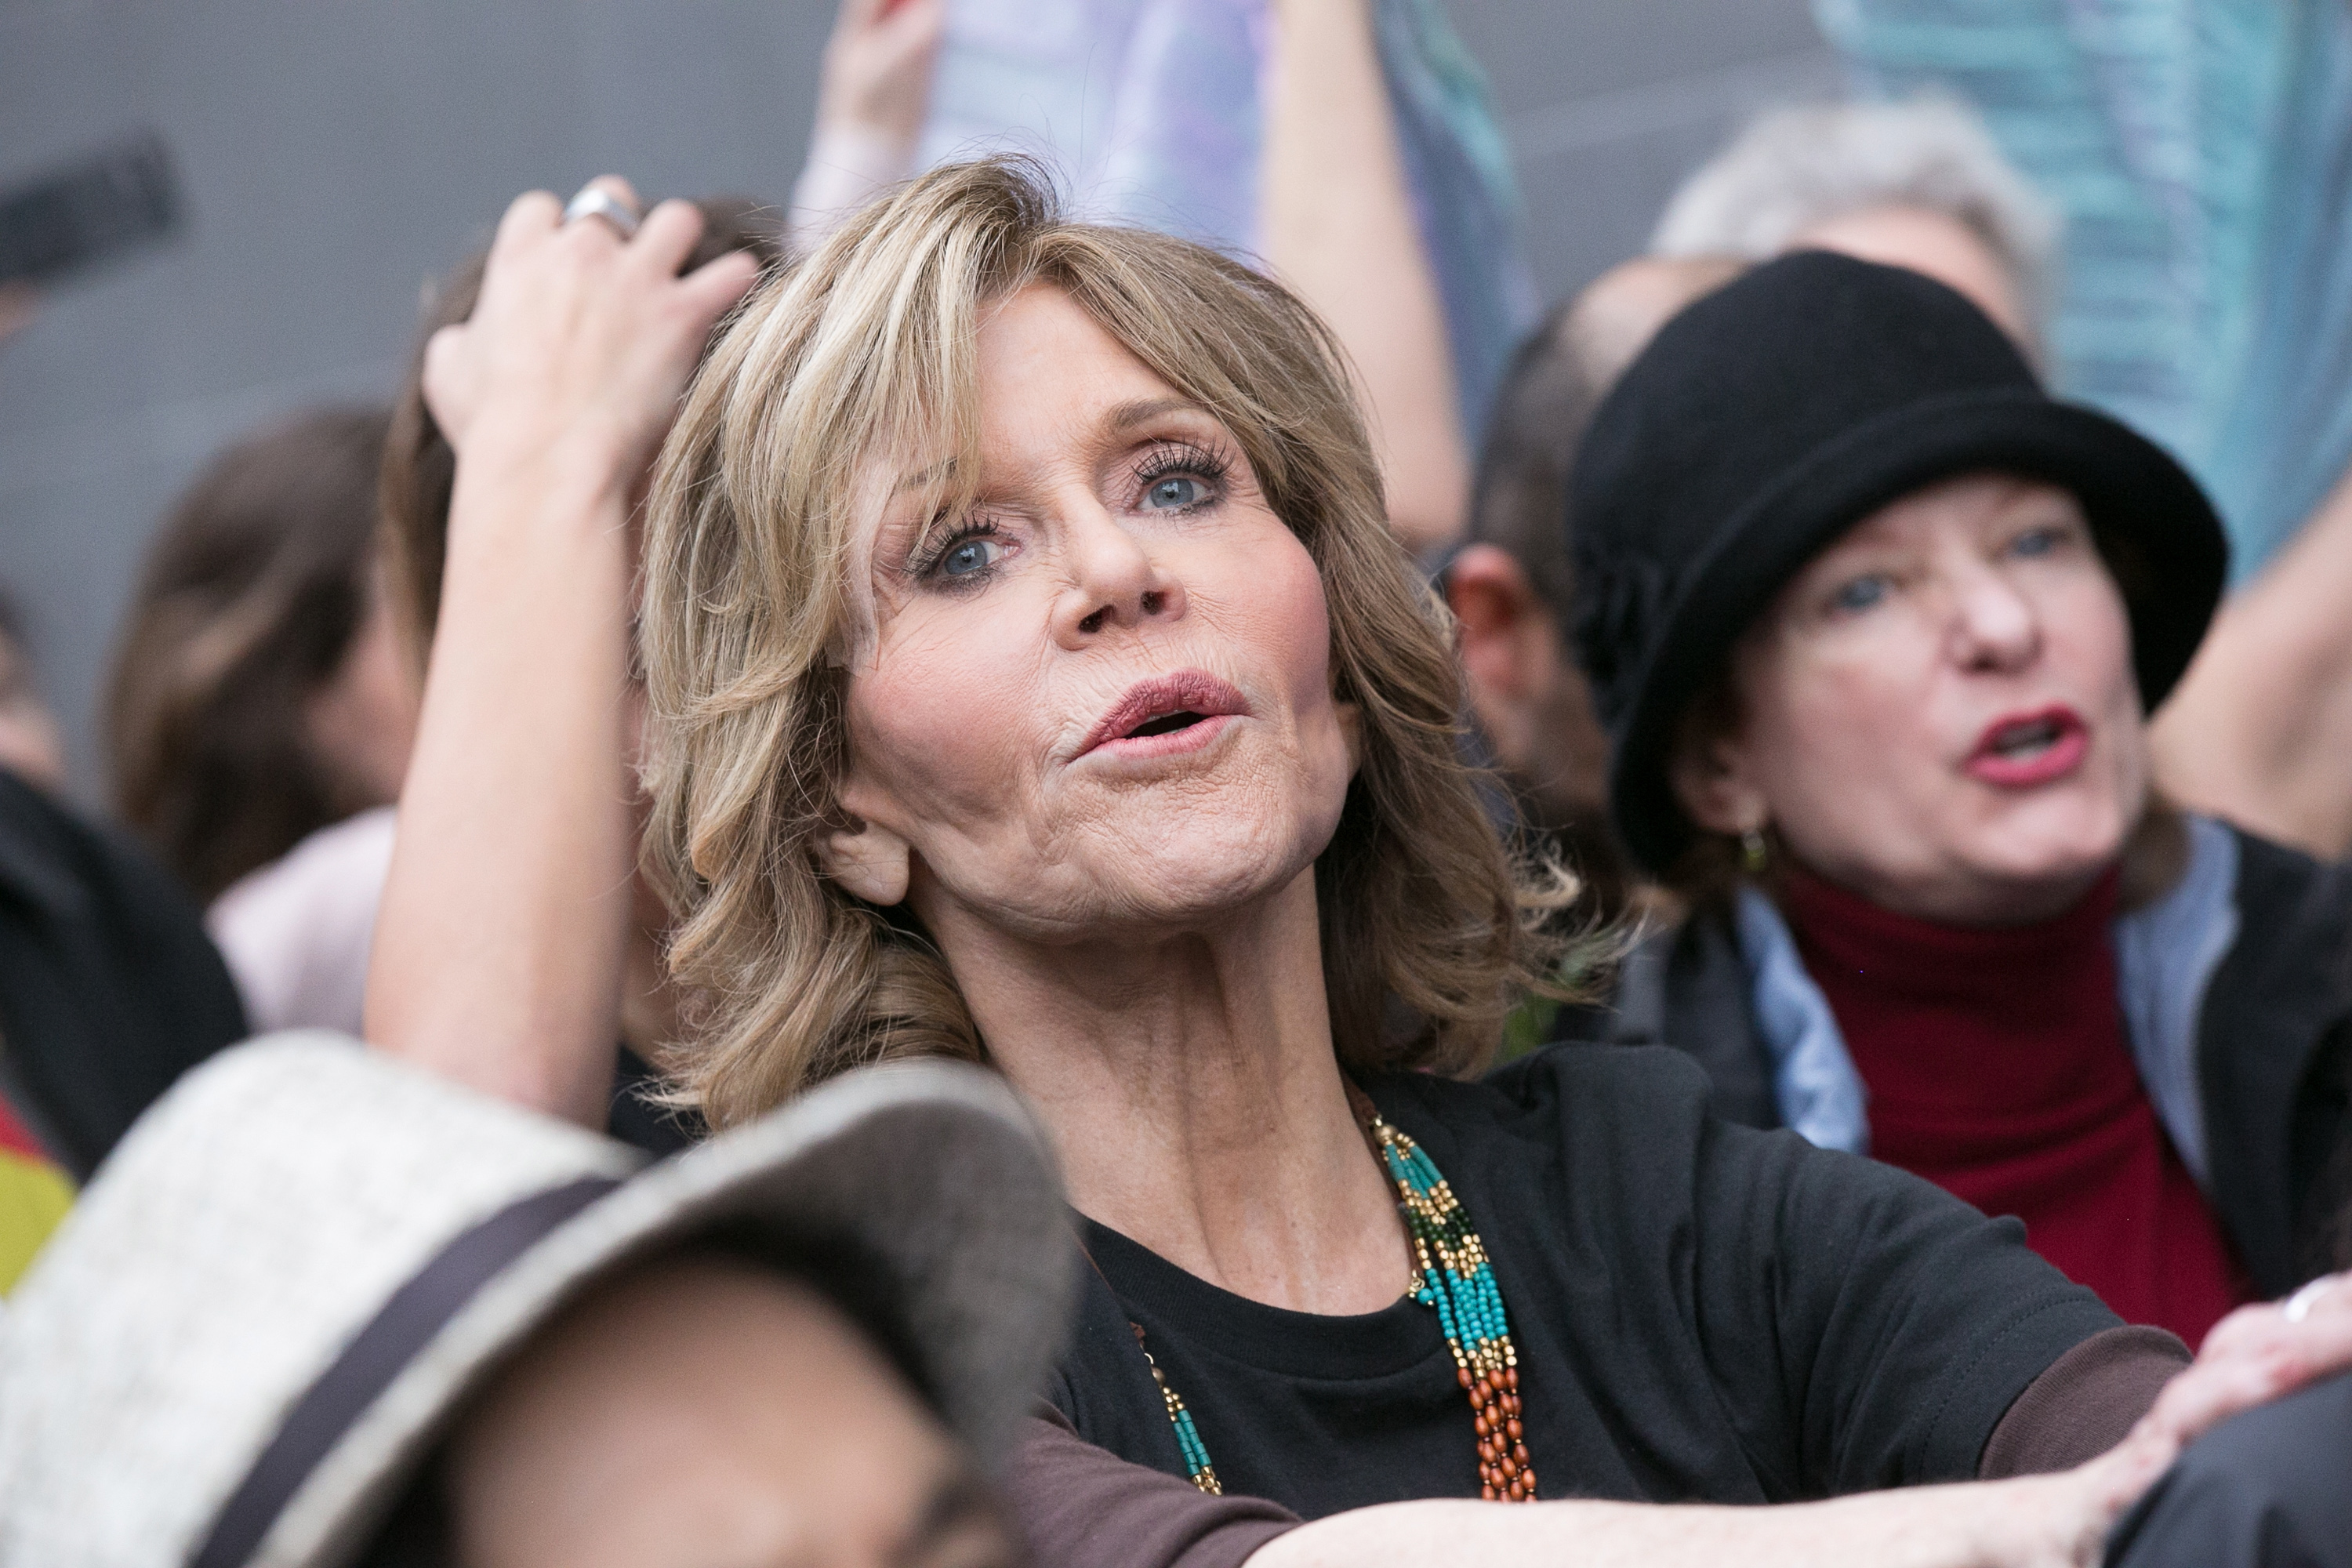 Jane Fonda attends the #BankExit Rally  in Los Angeles on Dec. 21. (Gabriel Olsen—Getty Images)